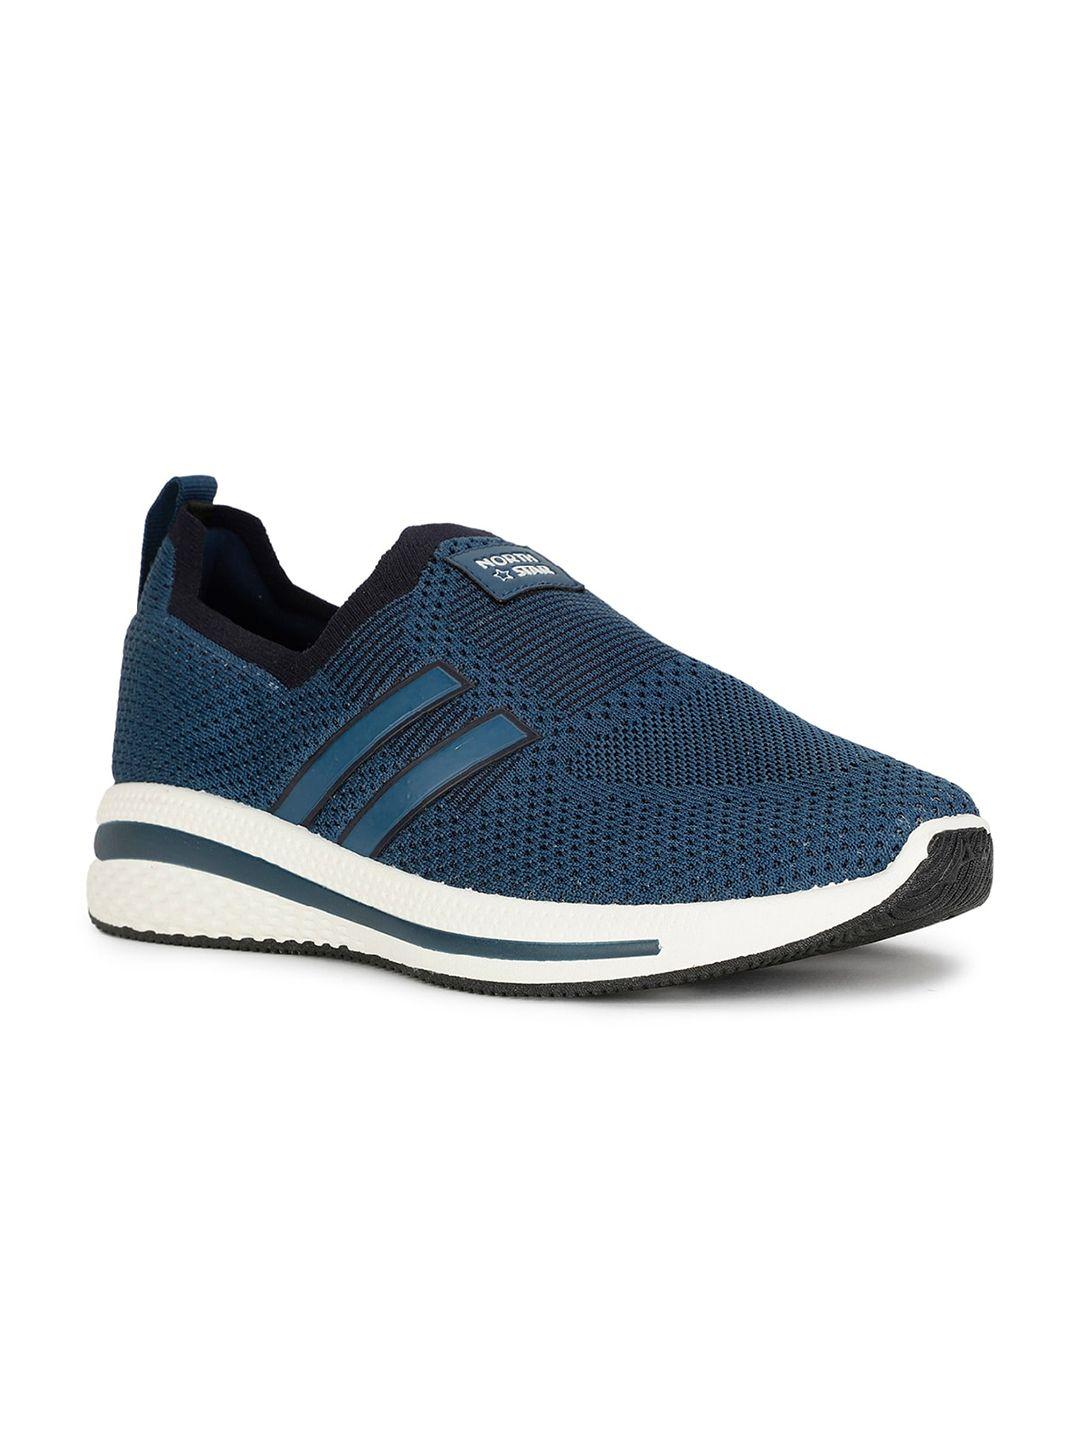 north star men textile running sports shoes